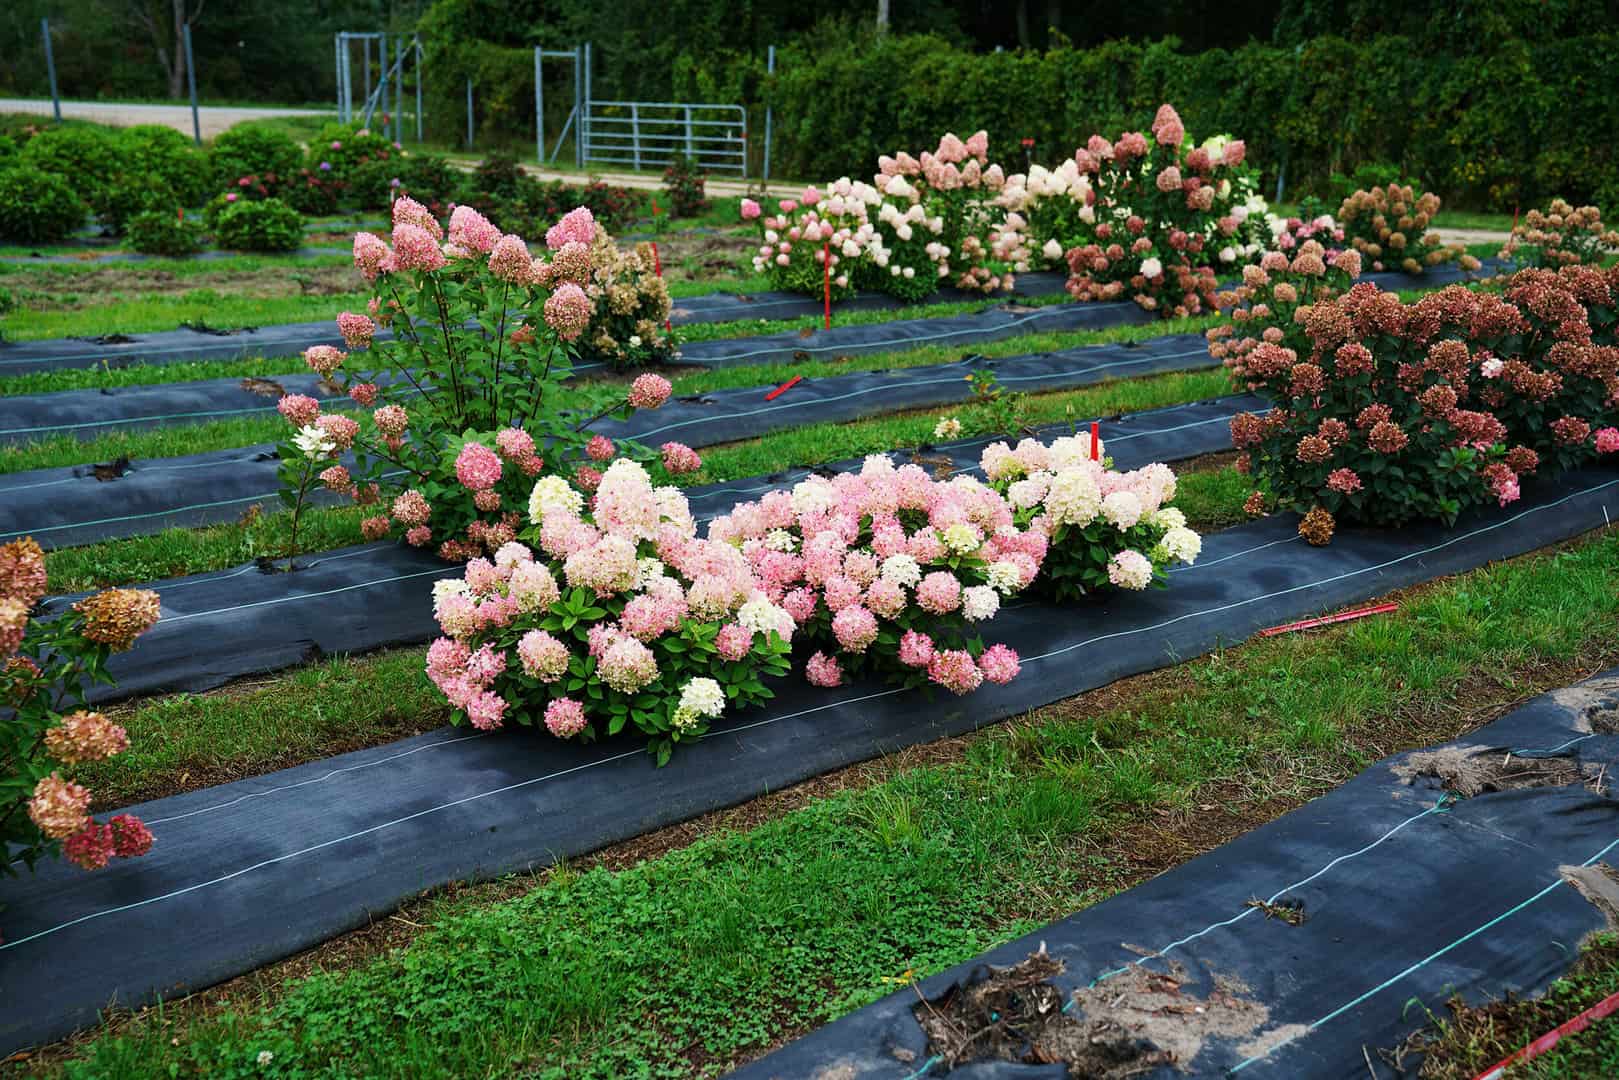 A field of hydrangeas at a growing facility